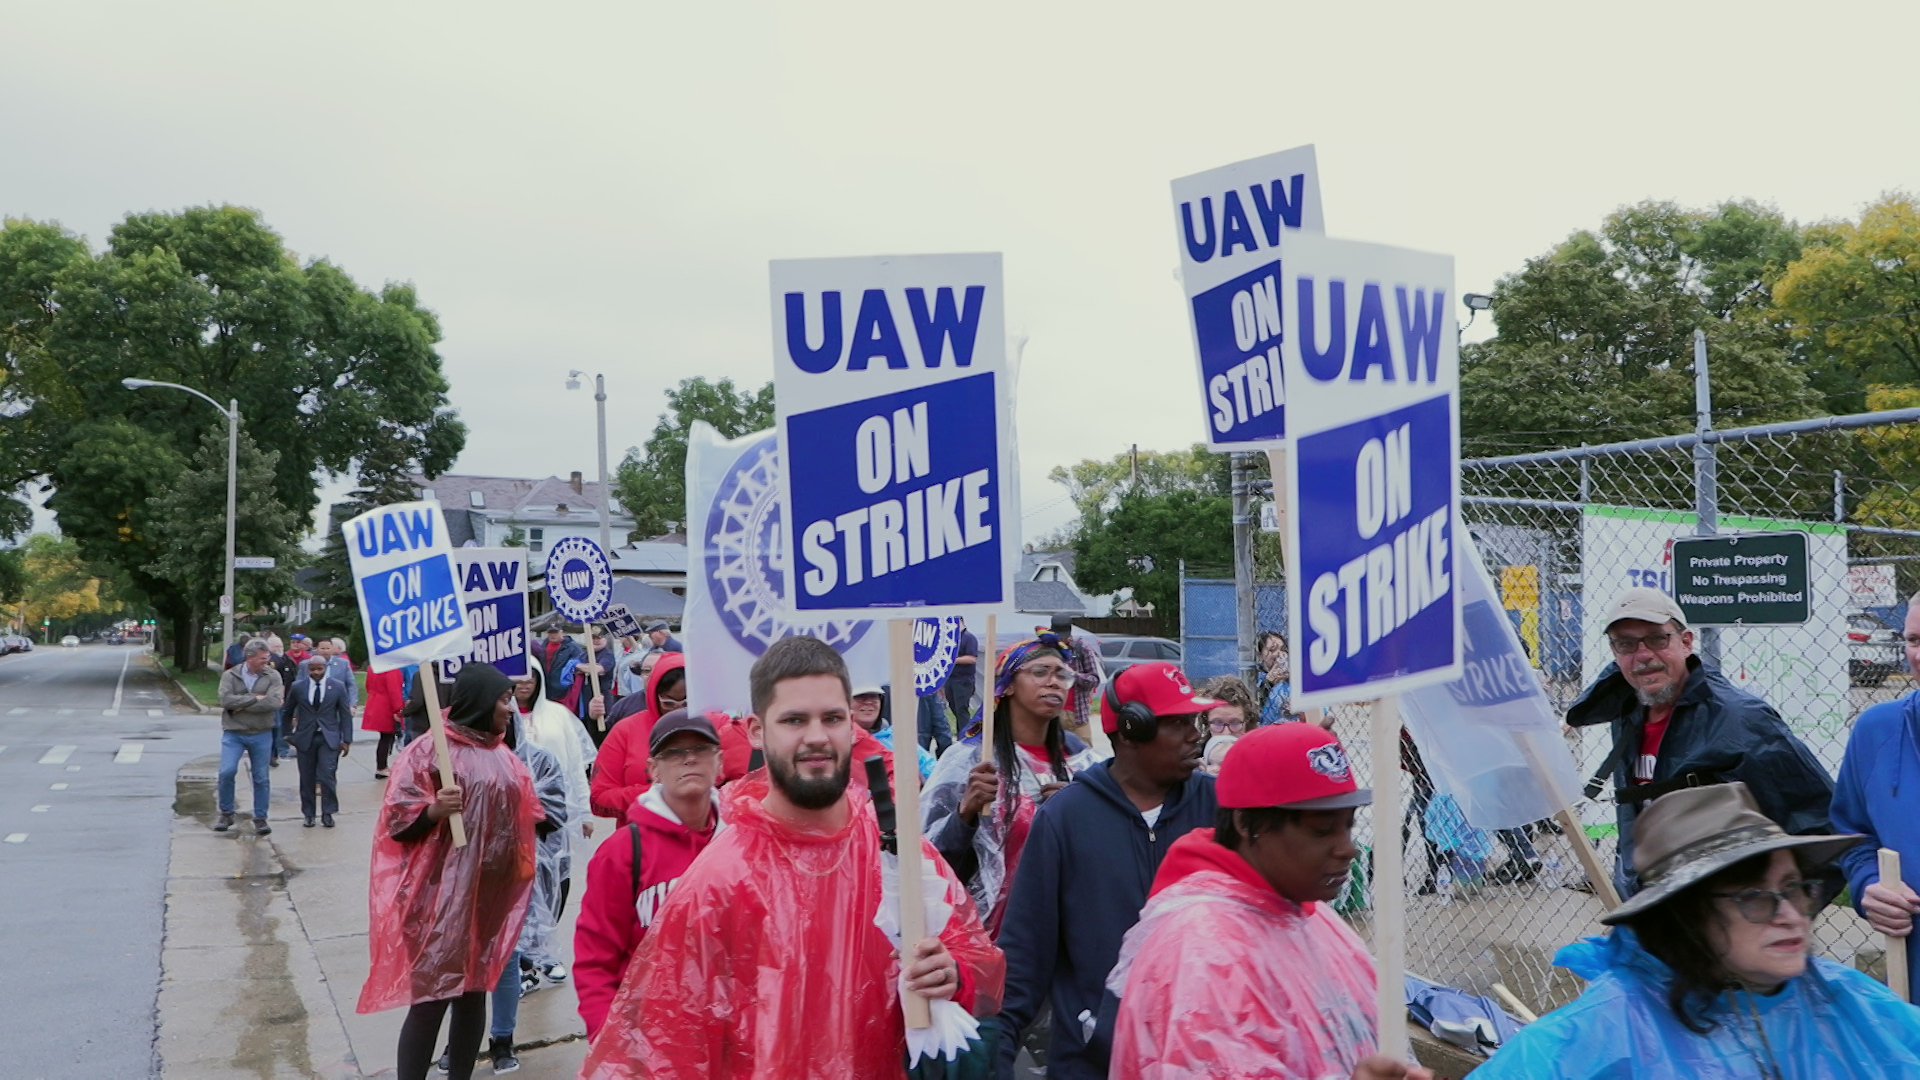 People wearing ponchos carrying signs with the United Auto Workers gear logo and the words "UAW On Strike" walk along a sidewalk next to a chain-link fence topped with barbed wire, with a street, building and trees in the background.